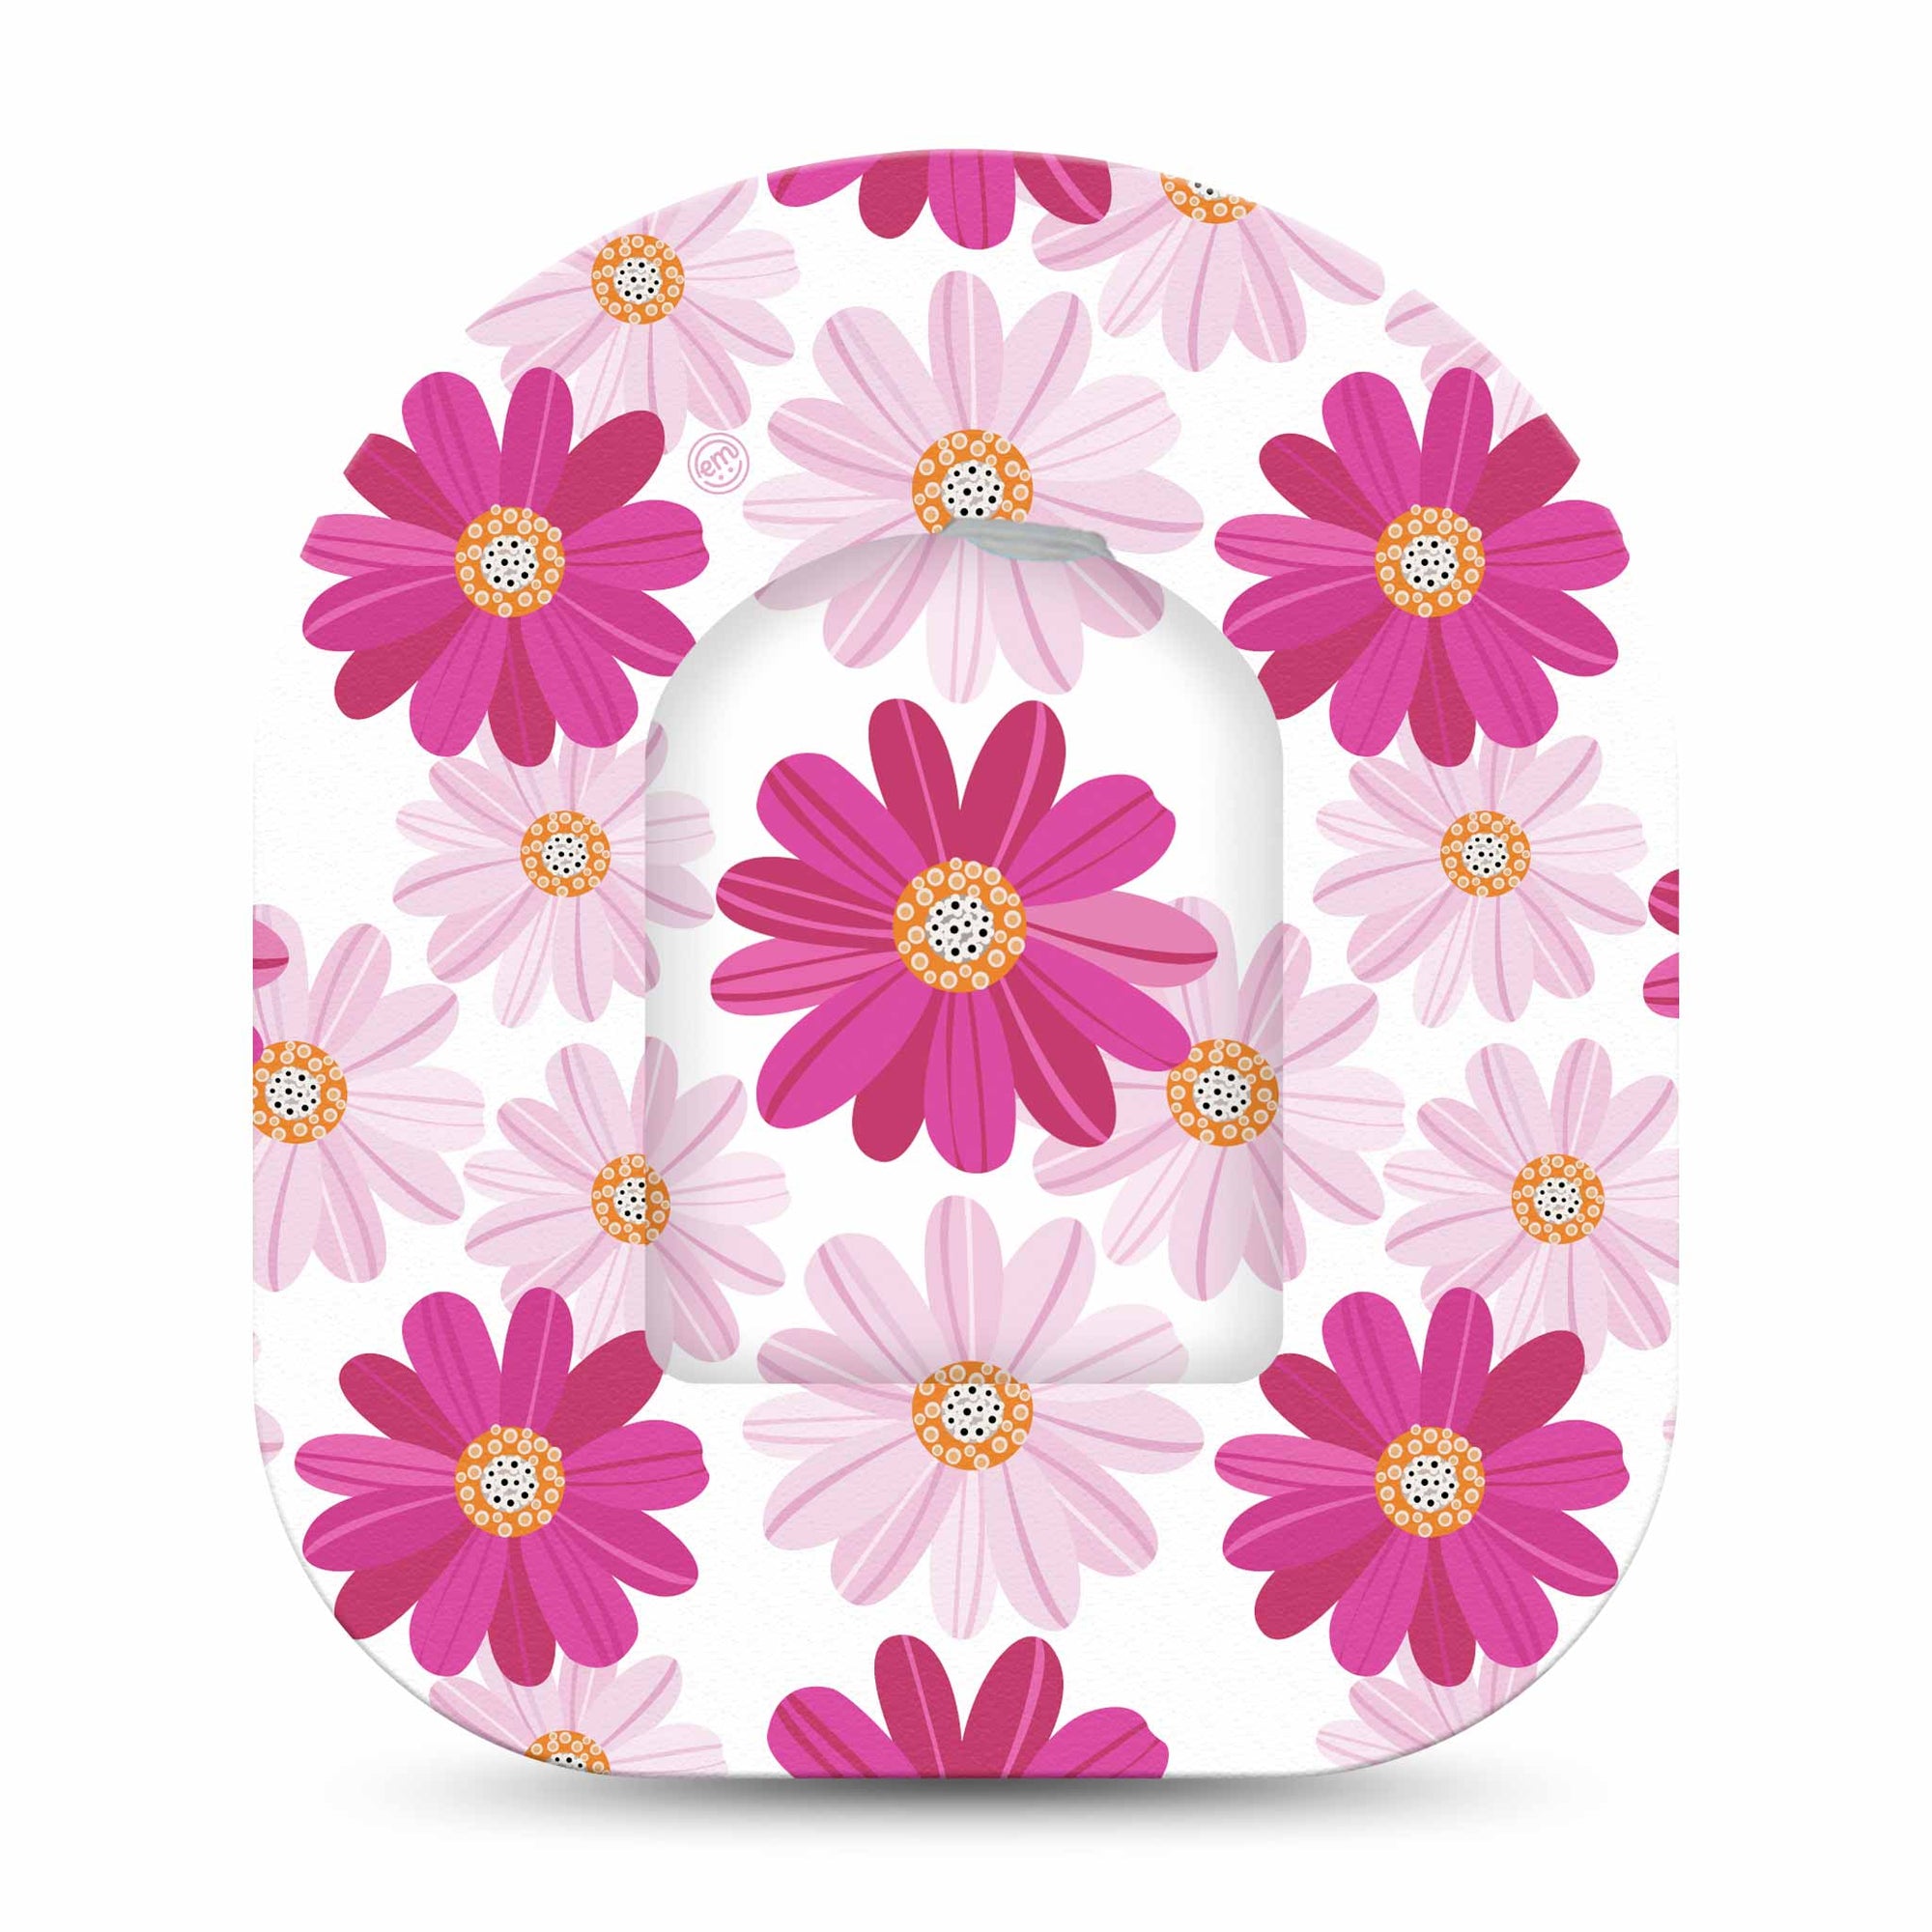 Brilliant Daisies Omnipod Pump Sticker and Matching Brilliant Daisies Patch